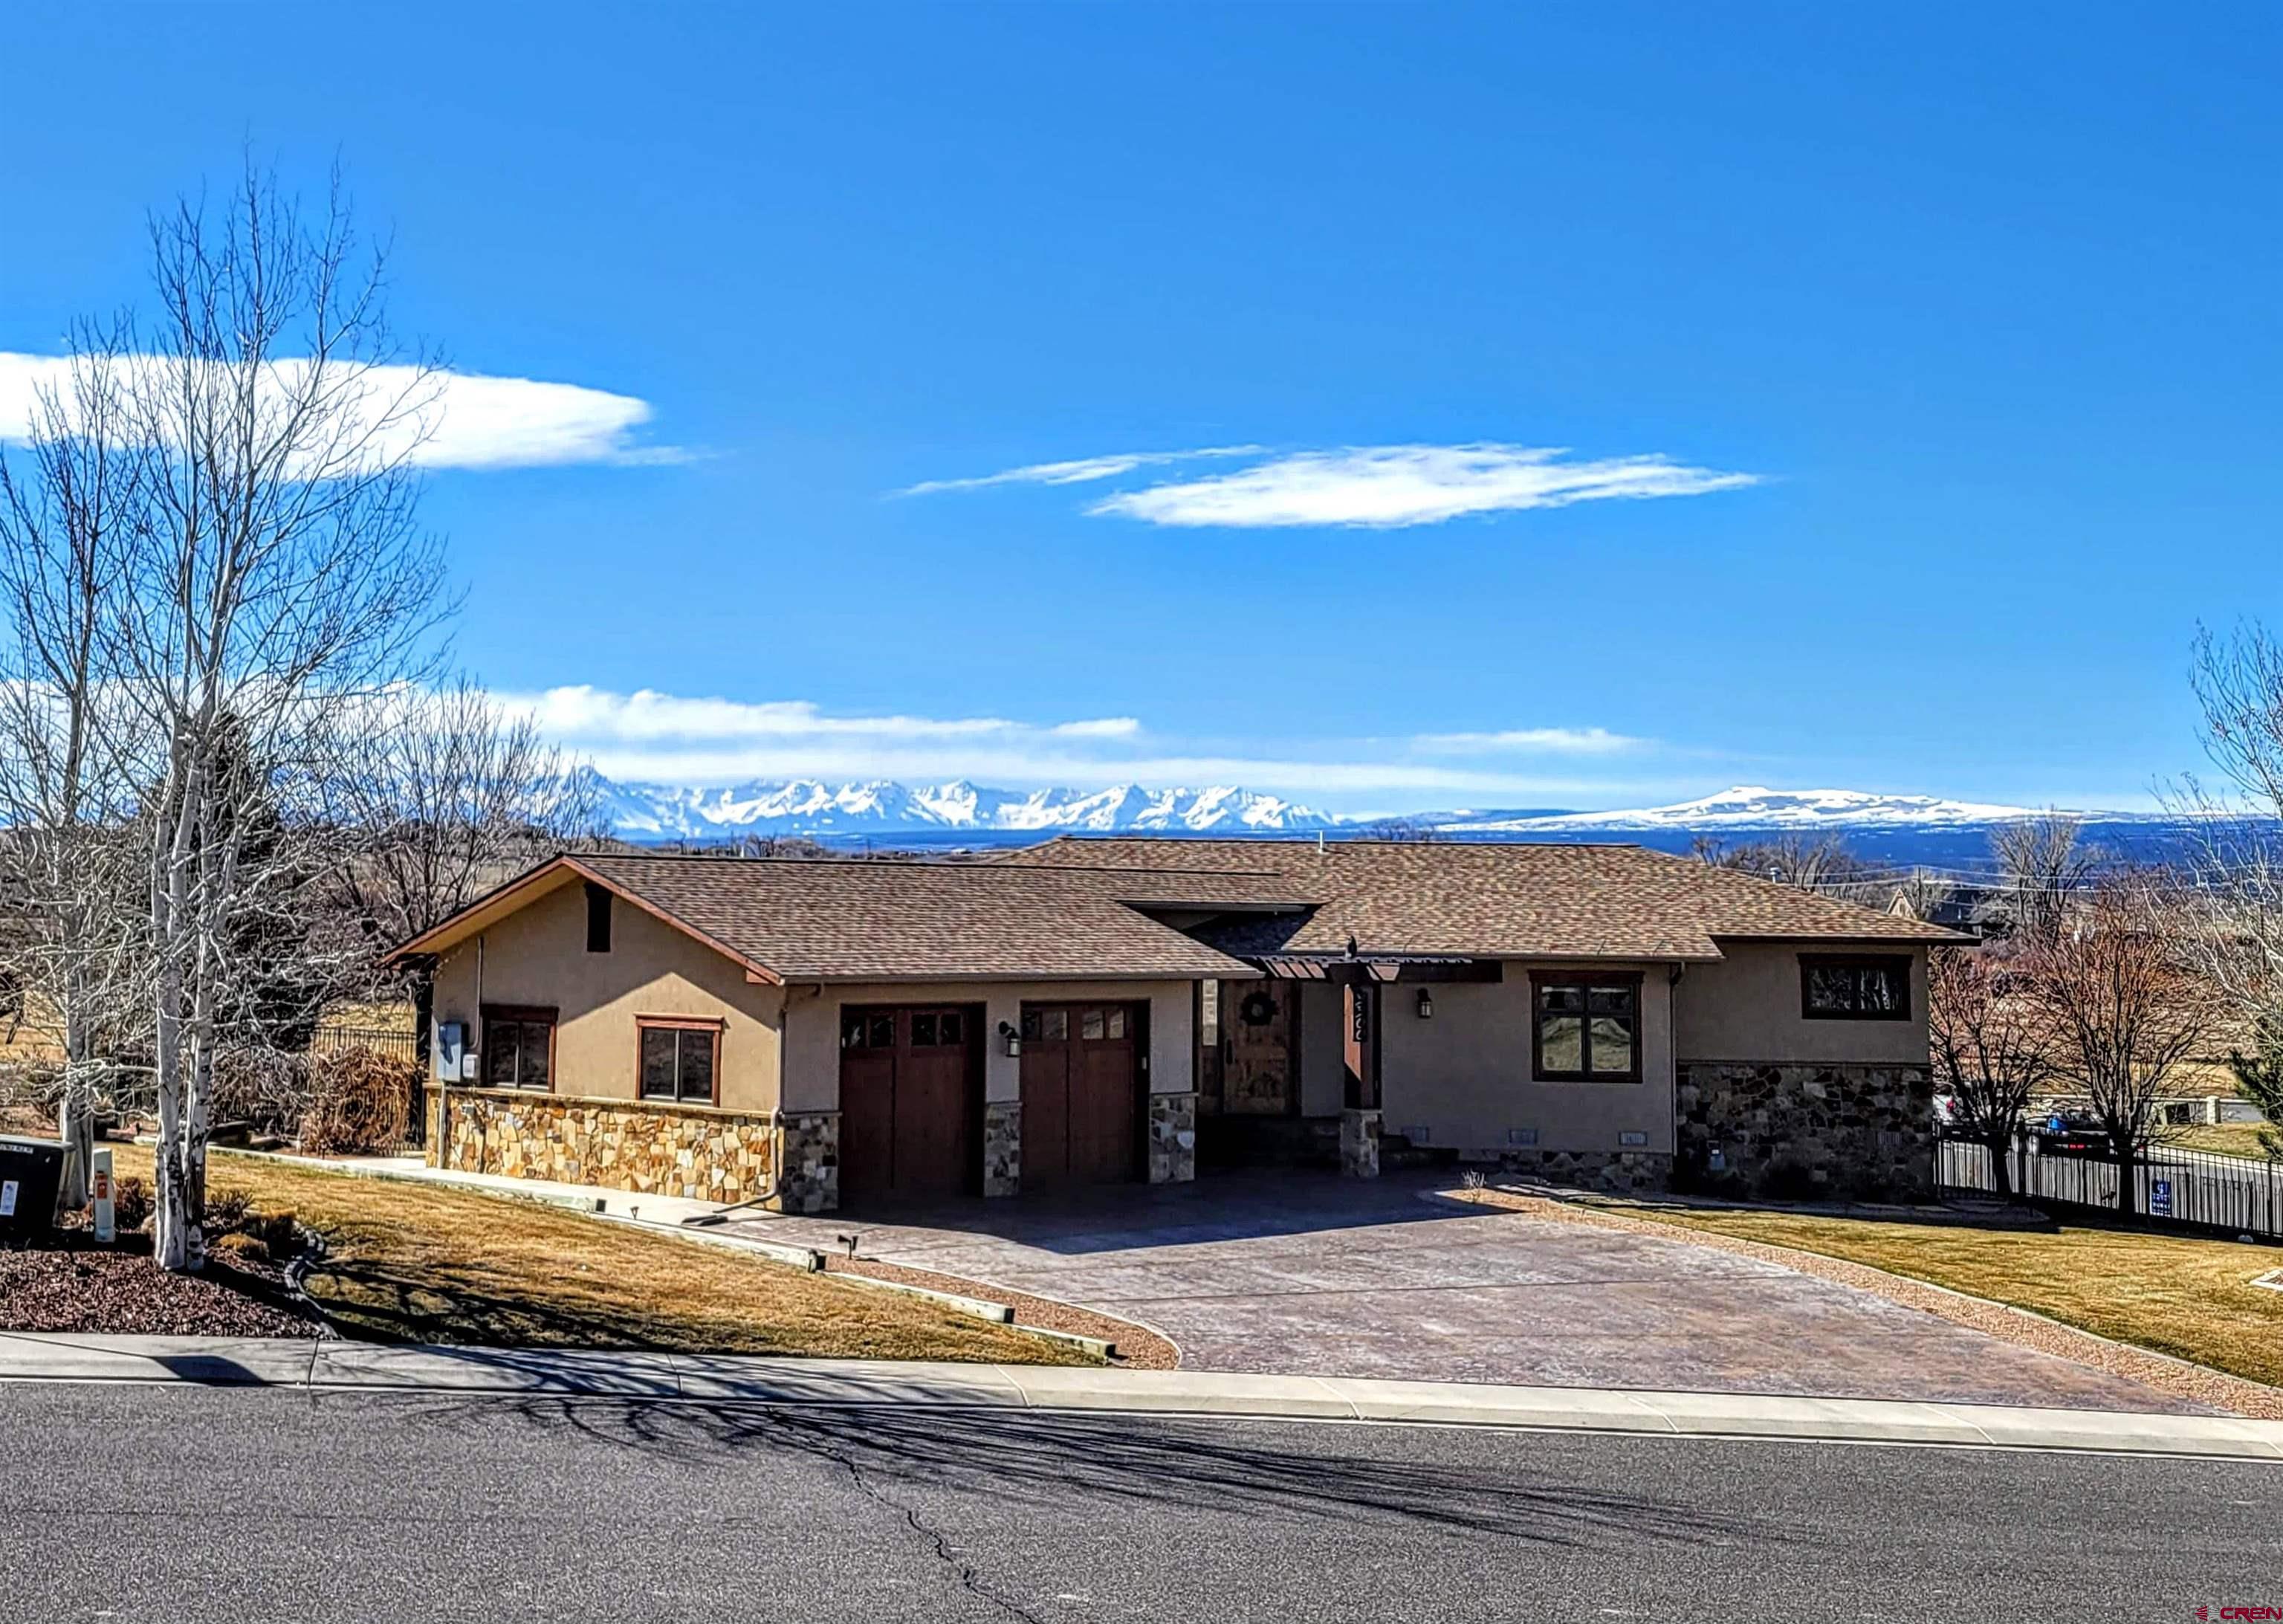 It just doesn't get much better if you're looking for the highest quality in design and craftmanship, awesome views of the San Juan Mountains,  and a prestigious location in the 1st Filing of the Brown Ranch Subdivision. You will also appreciate the close proximity to local attractions such as the Bridges Golf Club, the City Recreation Center and all the retail and restaurant options at the south end of town.  The 1/3 acre Lot borders open space on the south side, and beautiful trees, landscaping and perimiter fencing around the back yard.  The main level of this southwest style, contemporary home features 2,034 SF of Great Room with a gormet-class Kitchen and a huge Master Bedroom Suite.  The Great Room includes a gas-log fireplace with hearth and surround adorned with Brazilian stone. Majority of flooring is engineered hickory.  The Kitchen, baths and laundry room all have Italian porcelin tile floors. All built-ins, cabinets and woodwork are stained alder. Countertops  are all seamless Corian.  The kitchen has a large island with a built-in cook top and retractable exhaust fan. Appliances  are all stainless steel by Kitchen Aid and Kenmore Elite.  The Master Suite is uniquely laid-out with an internal hallway to access two separate walk-in closets, the 5 piece Master Bath, plus your choice of two rooms, located front and back; one for sleeping and the other for office? den? fitness?  The Master Bath has double vanities, a soaker tub, and a walk-in stone tile shower.  From the garage you'll enter a mud room which connects to a walk-in pantry and spacious laundry room.  The Maytag Washer/Dryer set are also included.  There are 3 decks off the south and west sides of the main level.  The kitchen deck has a pergola and includes a gas grill with natural gas hook-up.  The living room deck is wide-open and provides the best 180 degree views.  Another spacious deck off the Master Bedroom is fully screened-in and covered for relaxation and privacy.  All decks utilize Trex decking and metal railings. The 1,100 SF walkout basement has two bedrooms, a full bath, a sitting area, and a large storage/mechanical room. Flooring consists of colored stamped concrete.  Additionally, the basement area may be closed off from the main level via a sliding, solid wood barndoor.  The garage contains a large safe and TESLA  Car Charger, which are both included. Overall this home will impress with it's style, functionality, and "like-new" condition.  Be sure to checkout the Matterport Tour link.